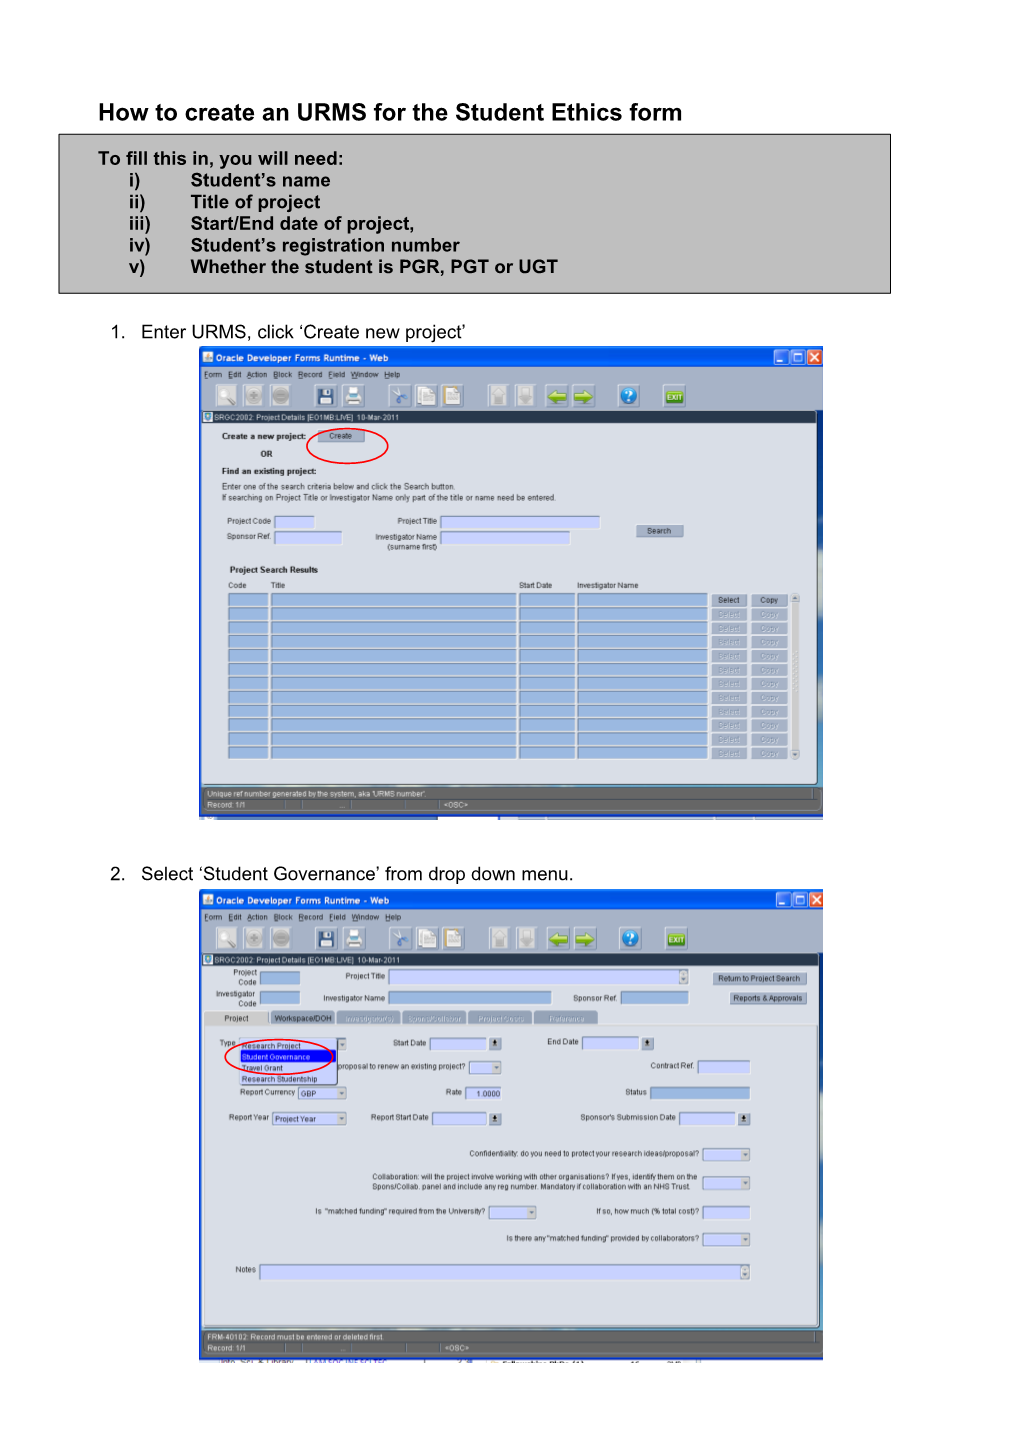 How to Create an URMS for the Student Ethics Form